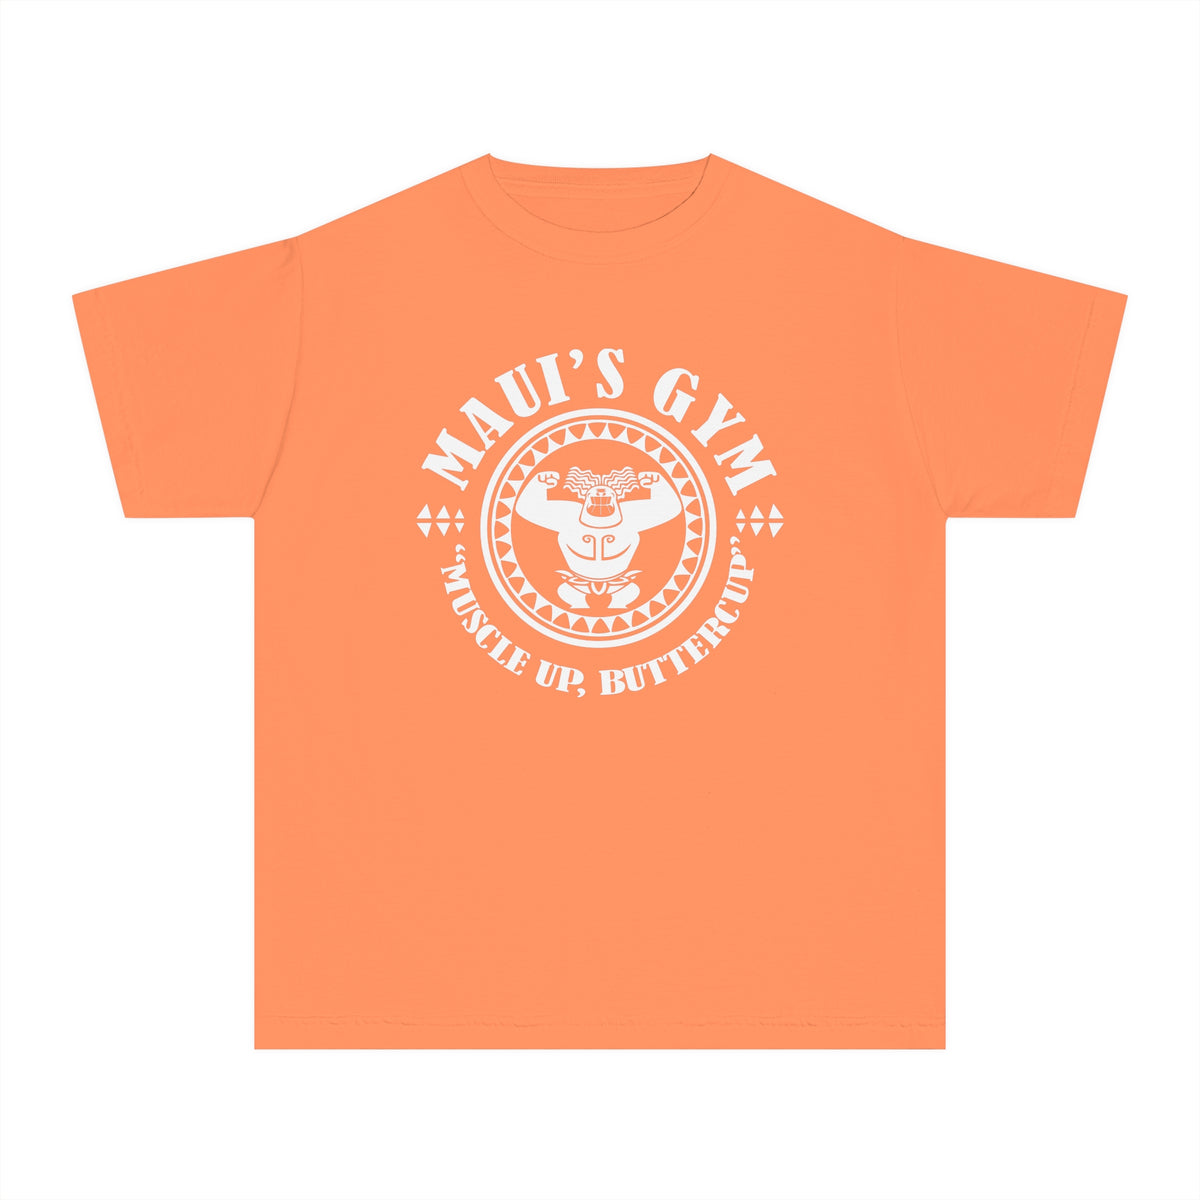 Maui's Gym Comfort Colors Youth Midweight Tee